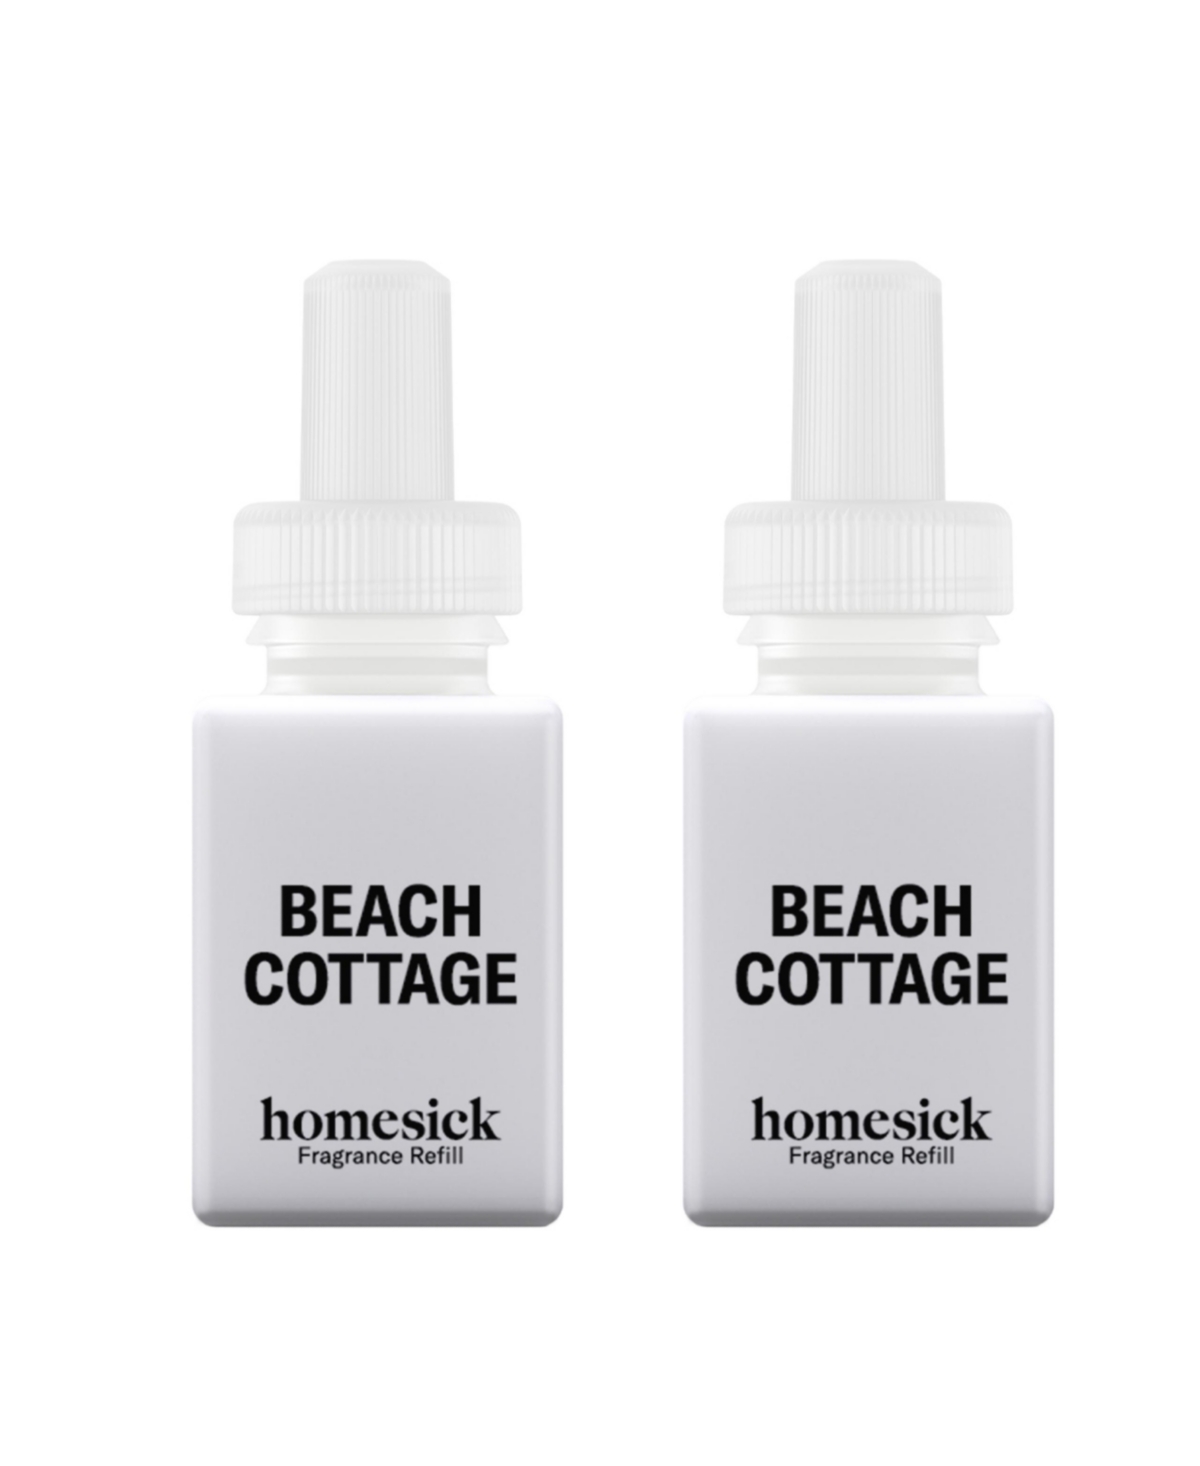 Homesick - Beach Cottage - Home Scent Refill - Smart Home Air Diffuser Fragrance - Up to 120-Hours of Luxury Fragrance per Refill - Clean & Safe